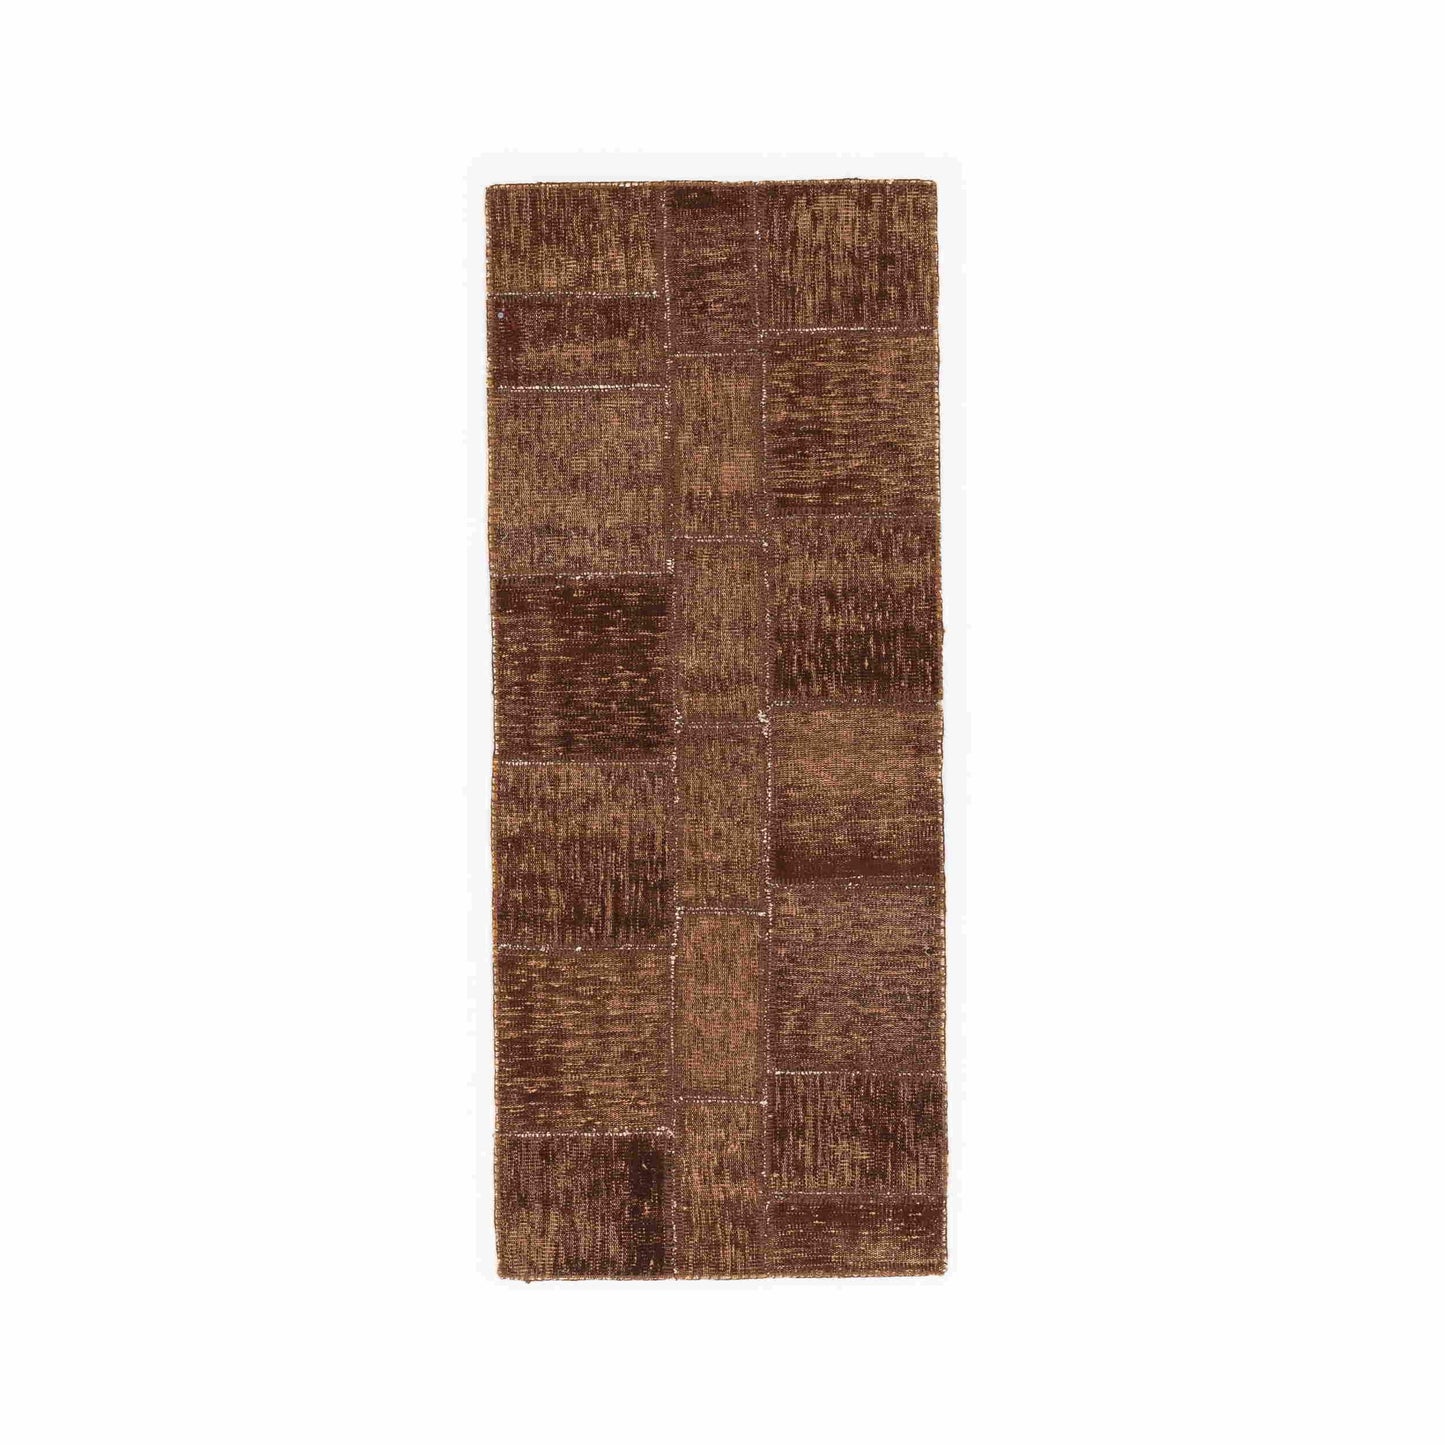 Oriental Rug Patchwork Hand Knotted Wool On Wool 81 x 198 Cm – 2' 8'' x 6' 6'' Brown C005 ER01